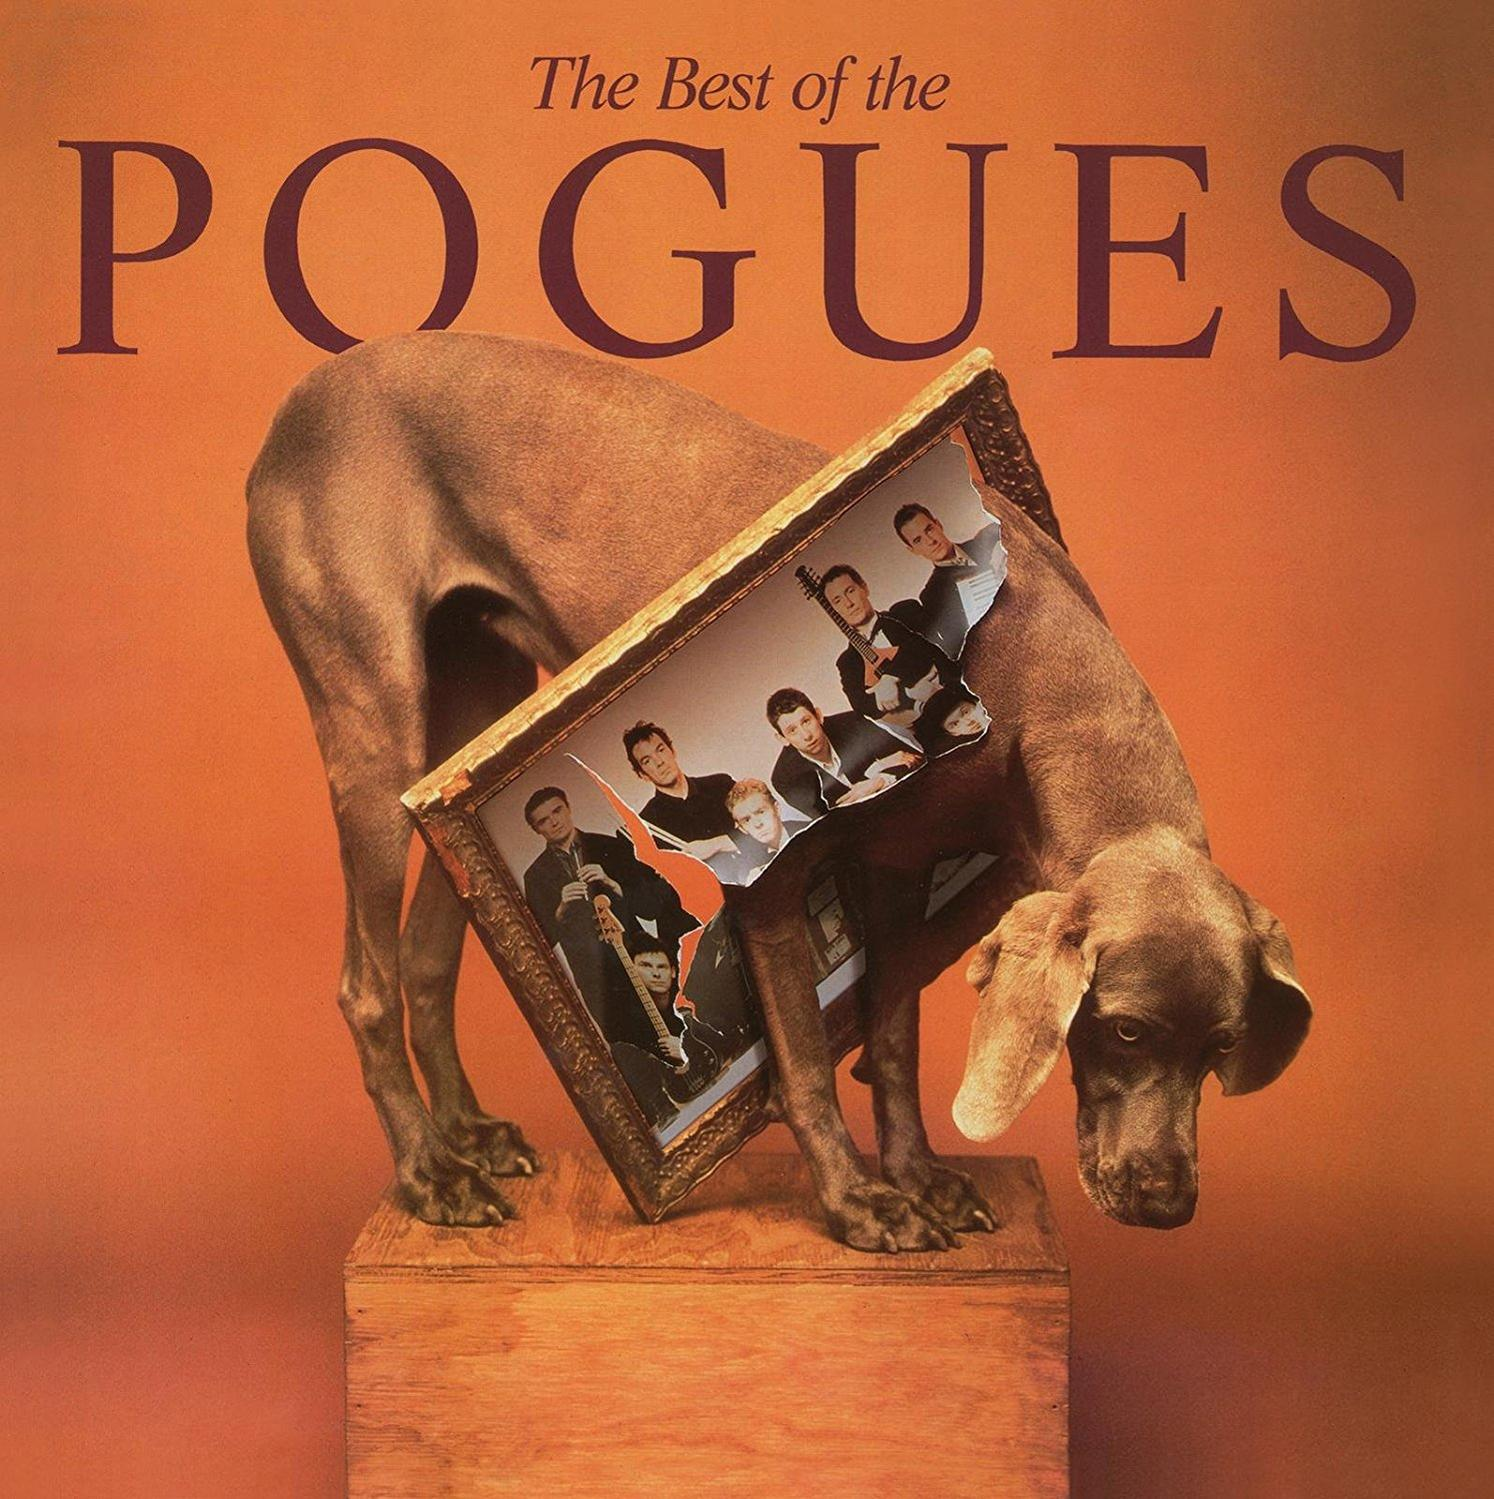 The Pogues - The Best Pogues The (Vinyl) of 